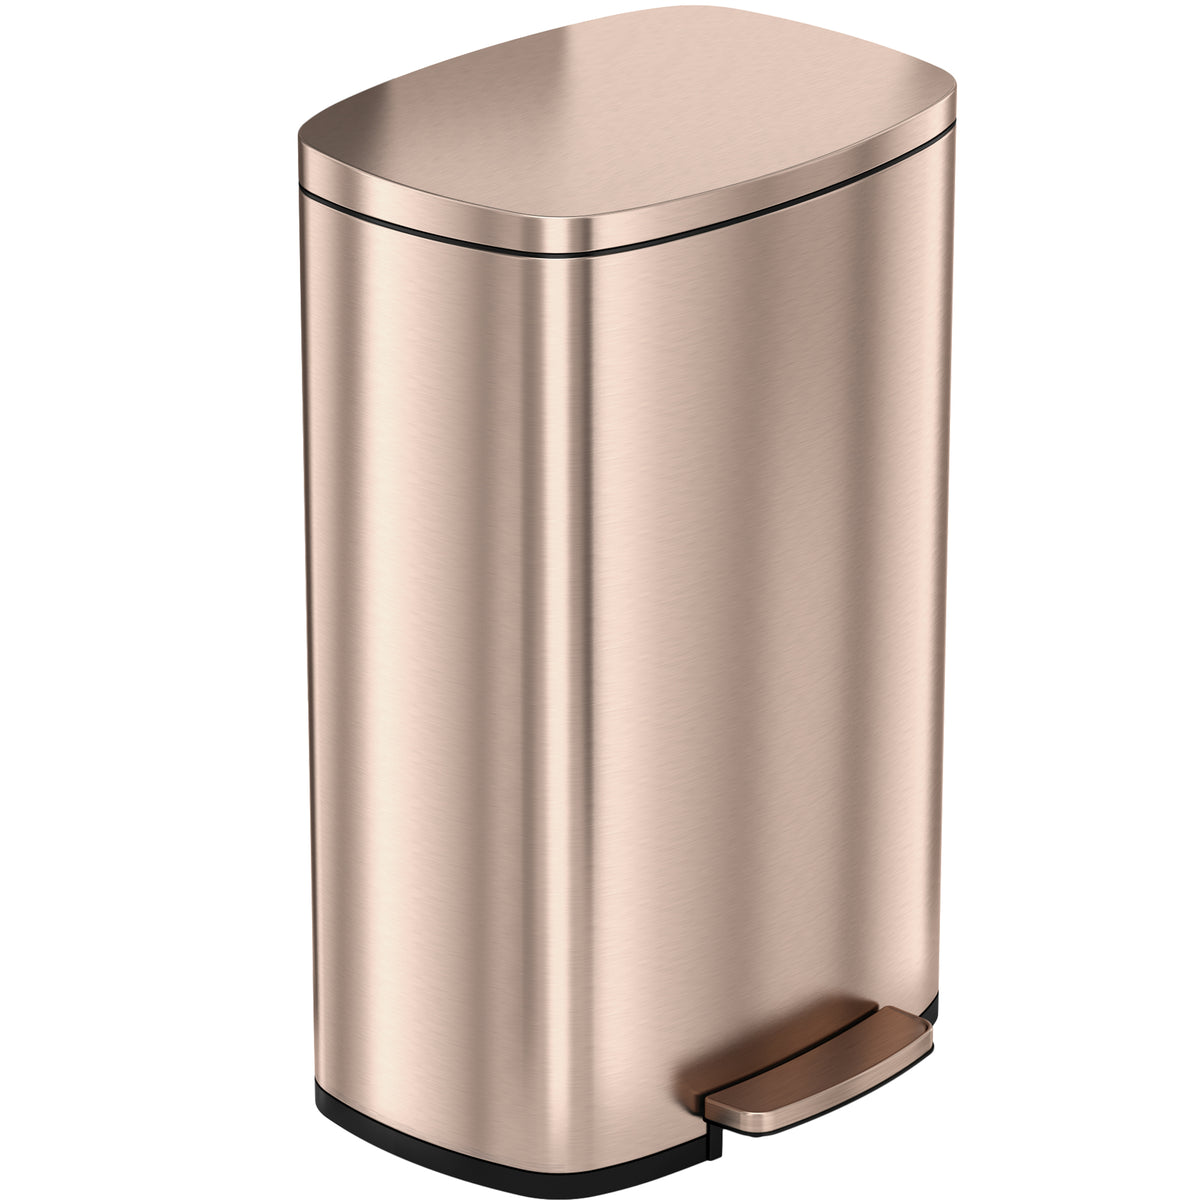 13.2 Gallon / 50 Liter SoftStep Rose Gold Step Pedal Trash Can